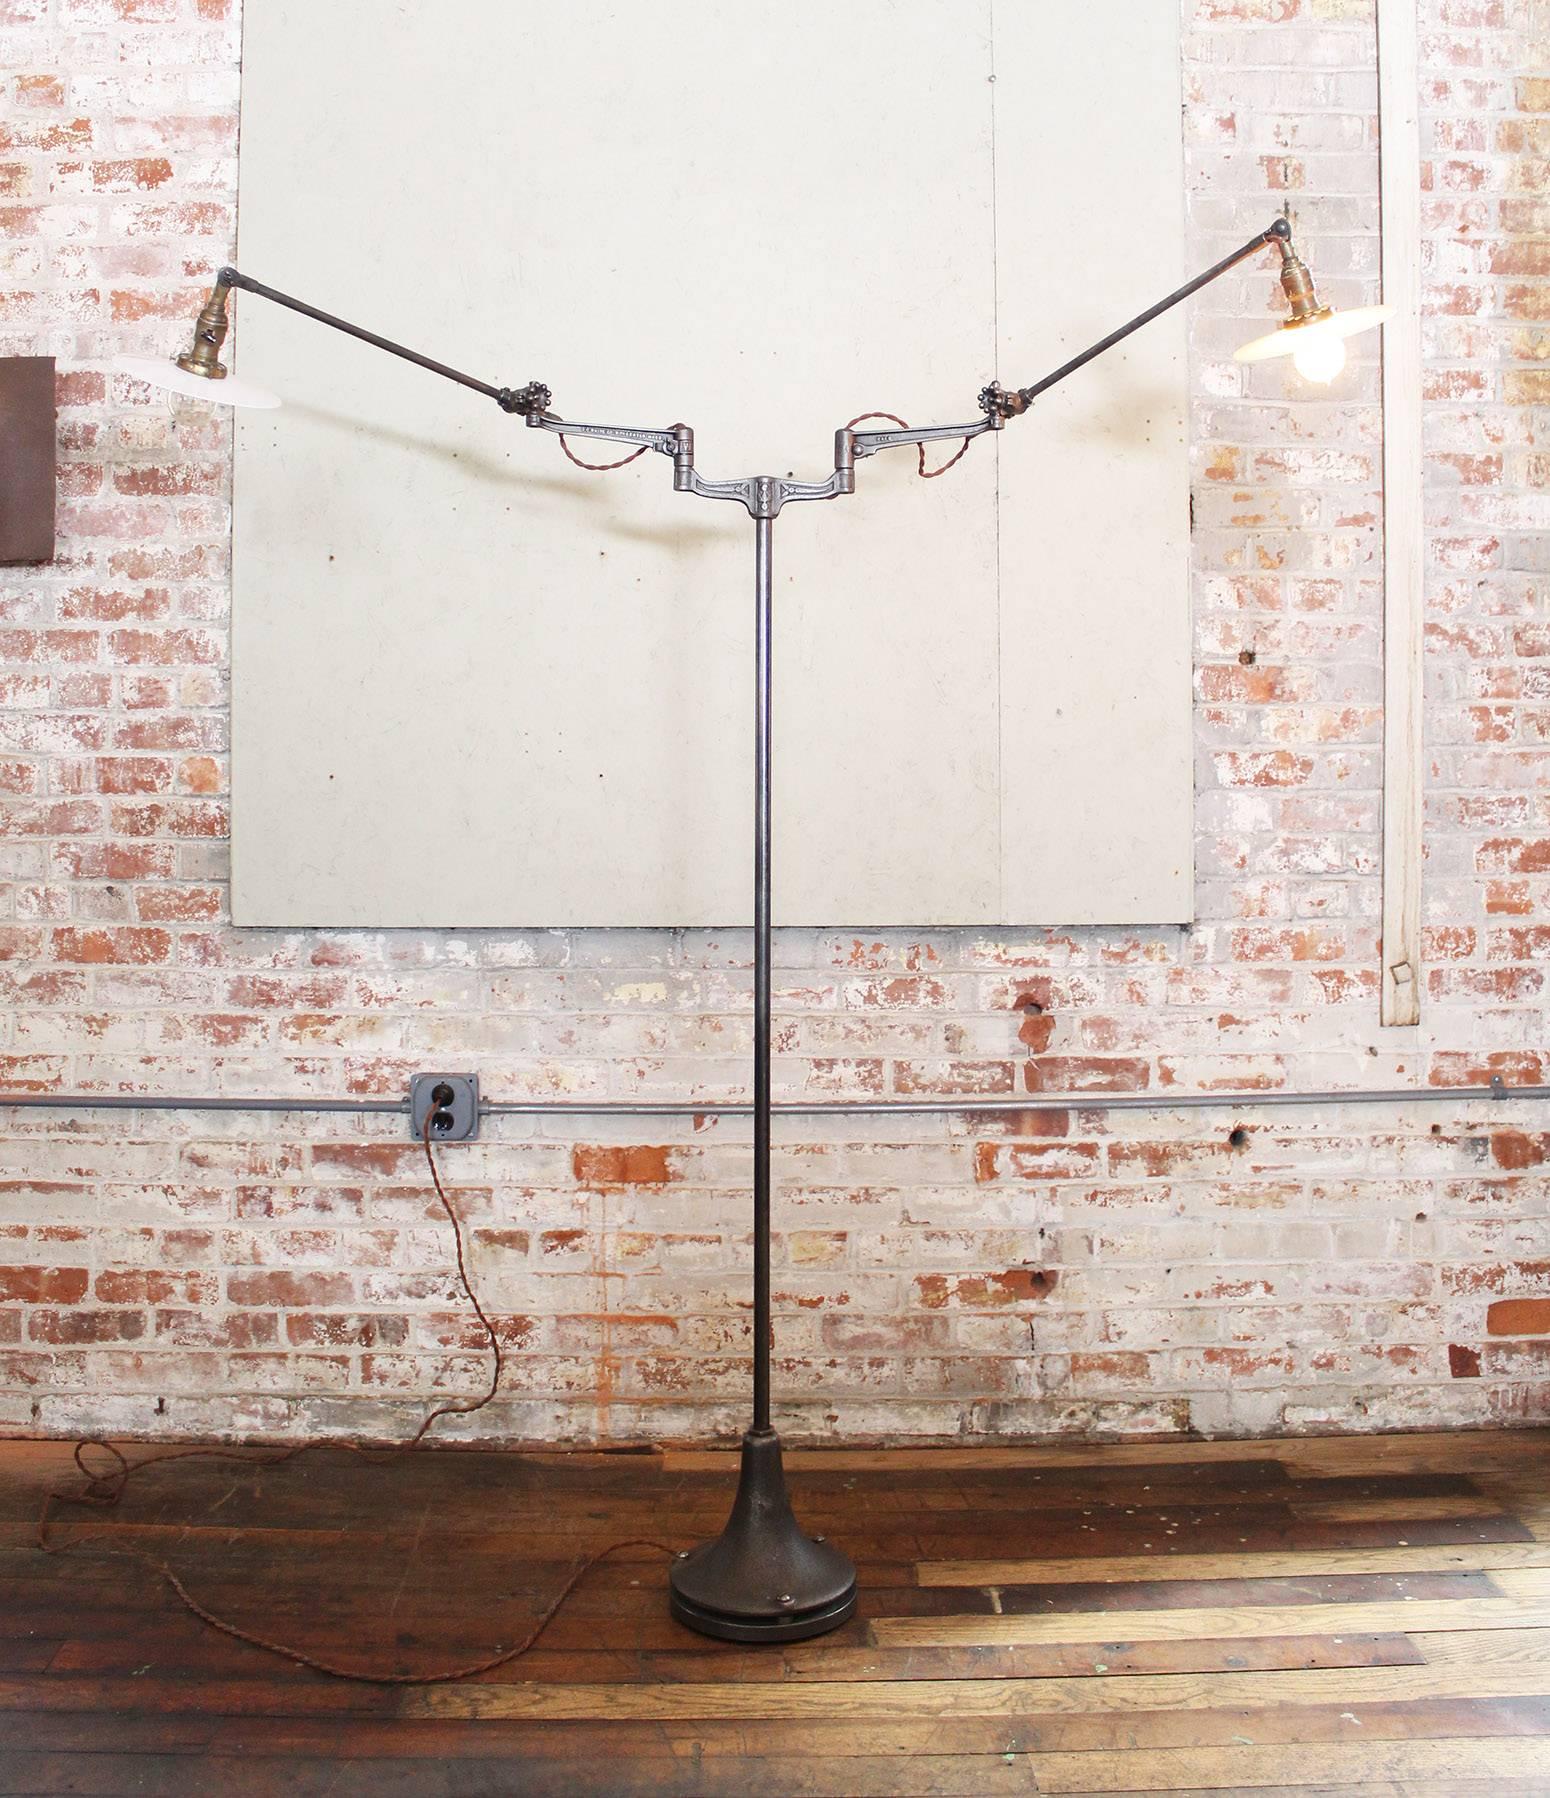 Adjustable double-arm machine task lamp with milk-glass shades and cast-iron O.C. White parts. Base measures 9 1/2